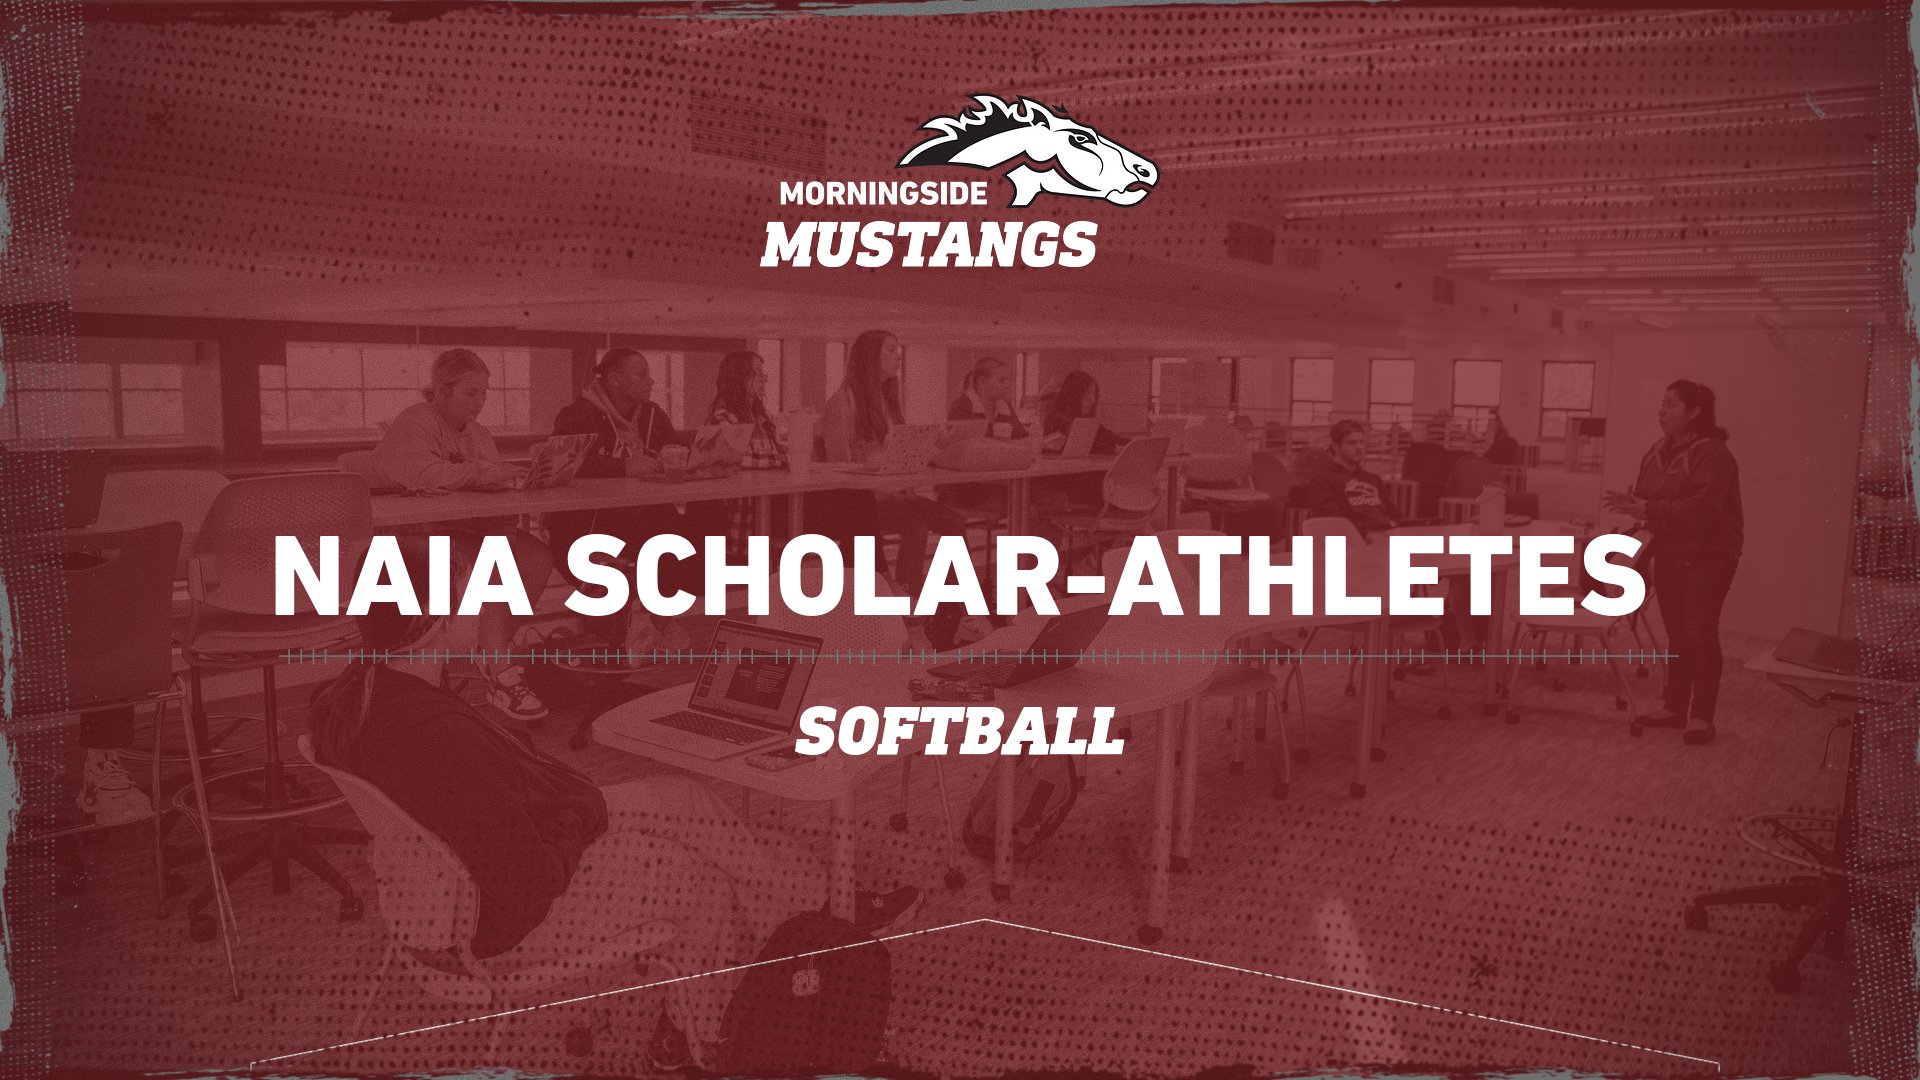 12 Mustang softballers named to NAIA Scholar-Athlete list